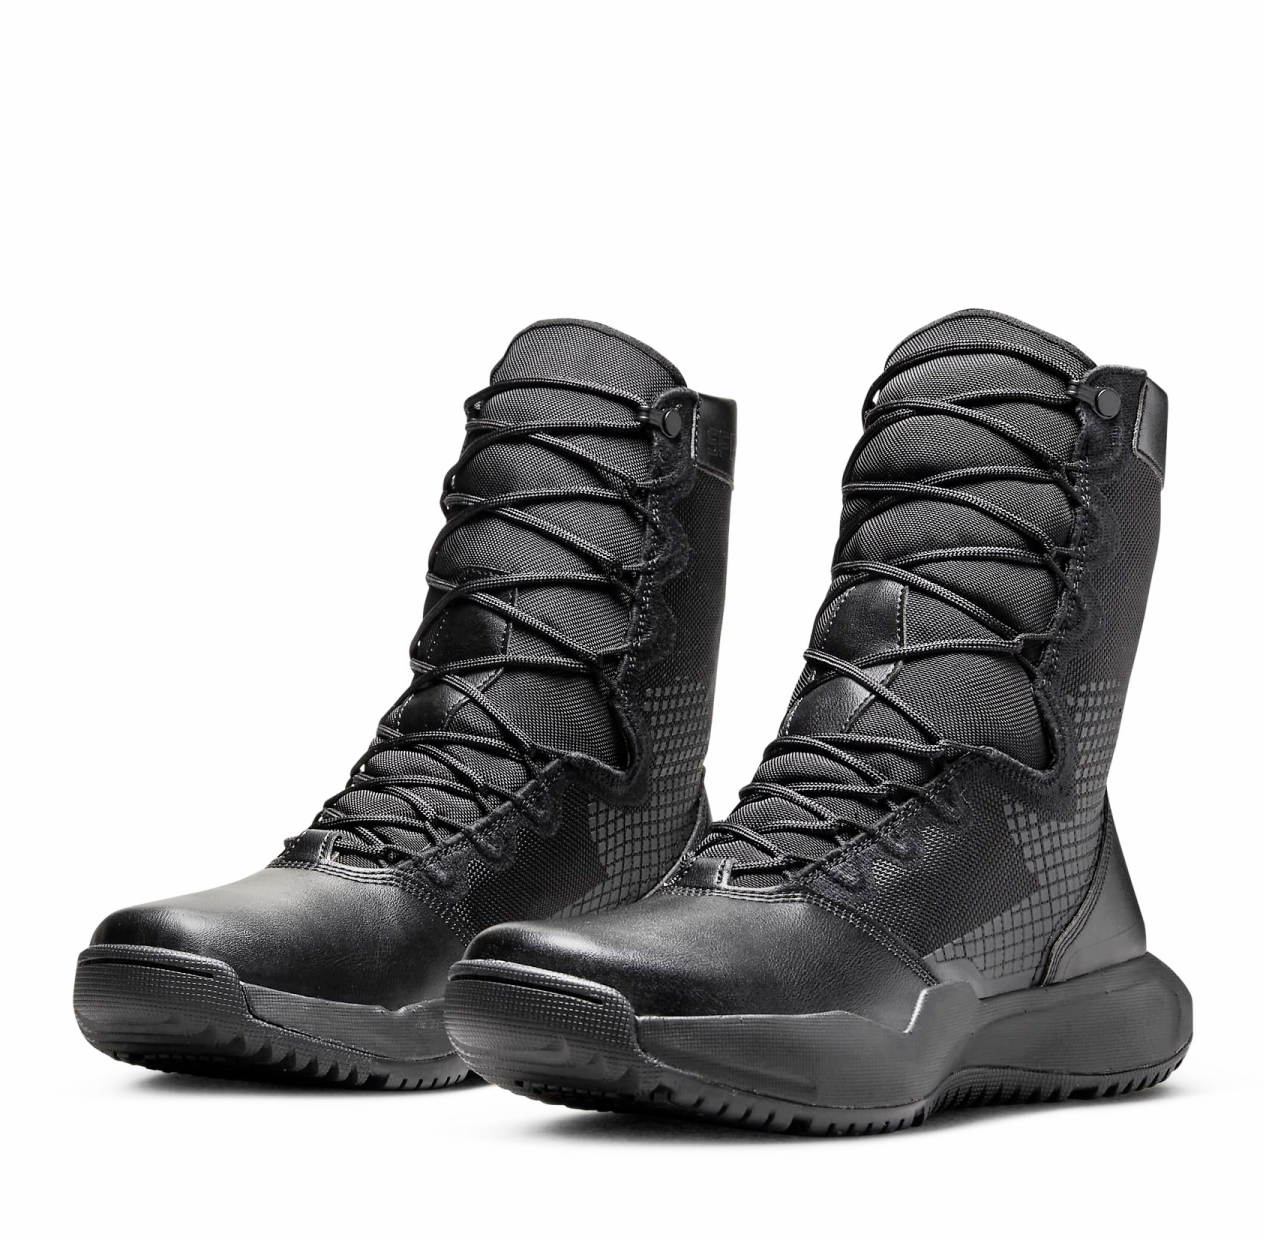 Nike SFB B1 Black Leather Tactical Boots DX2117-001